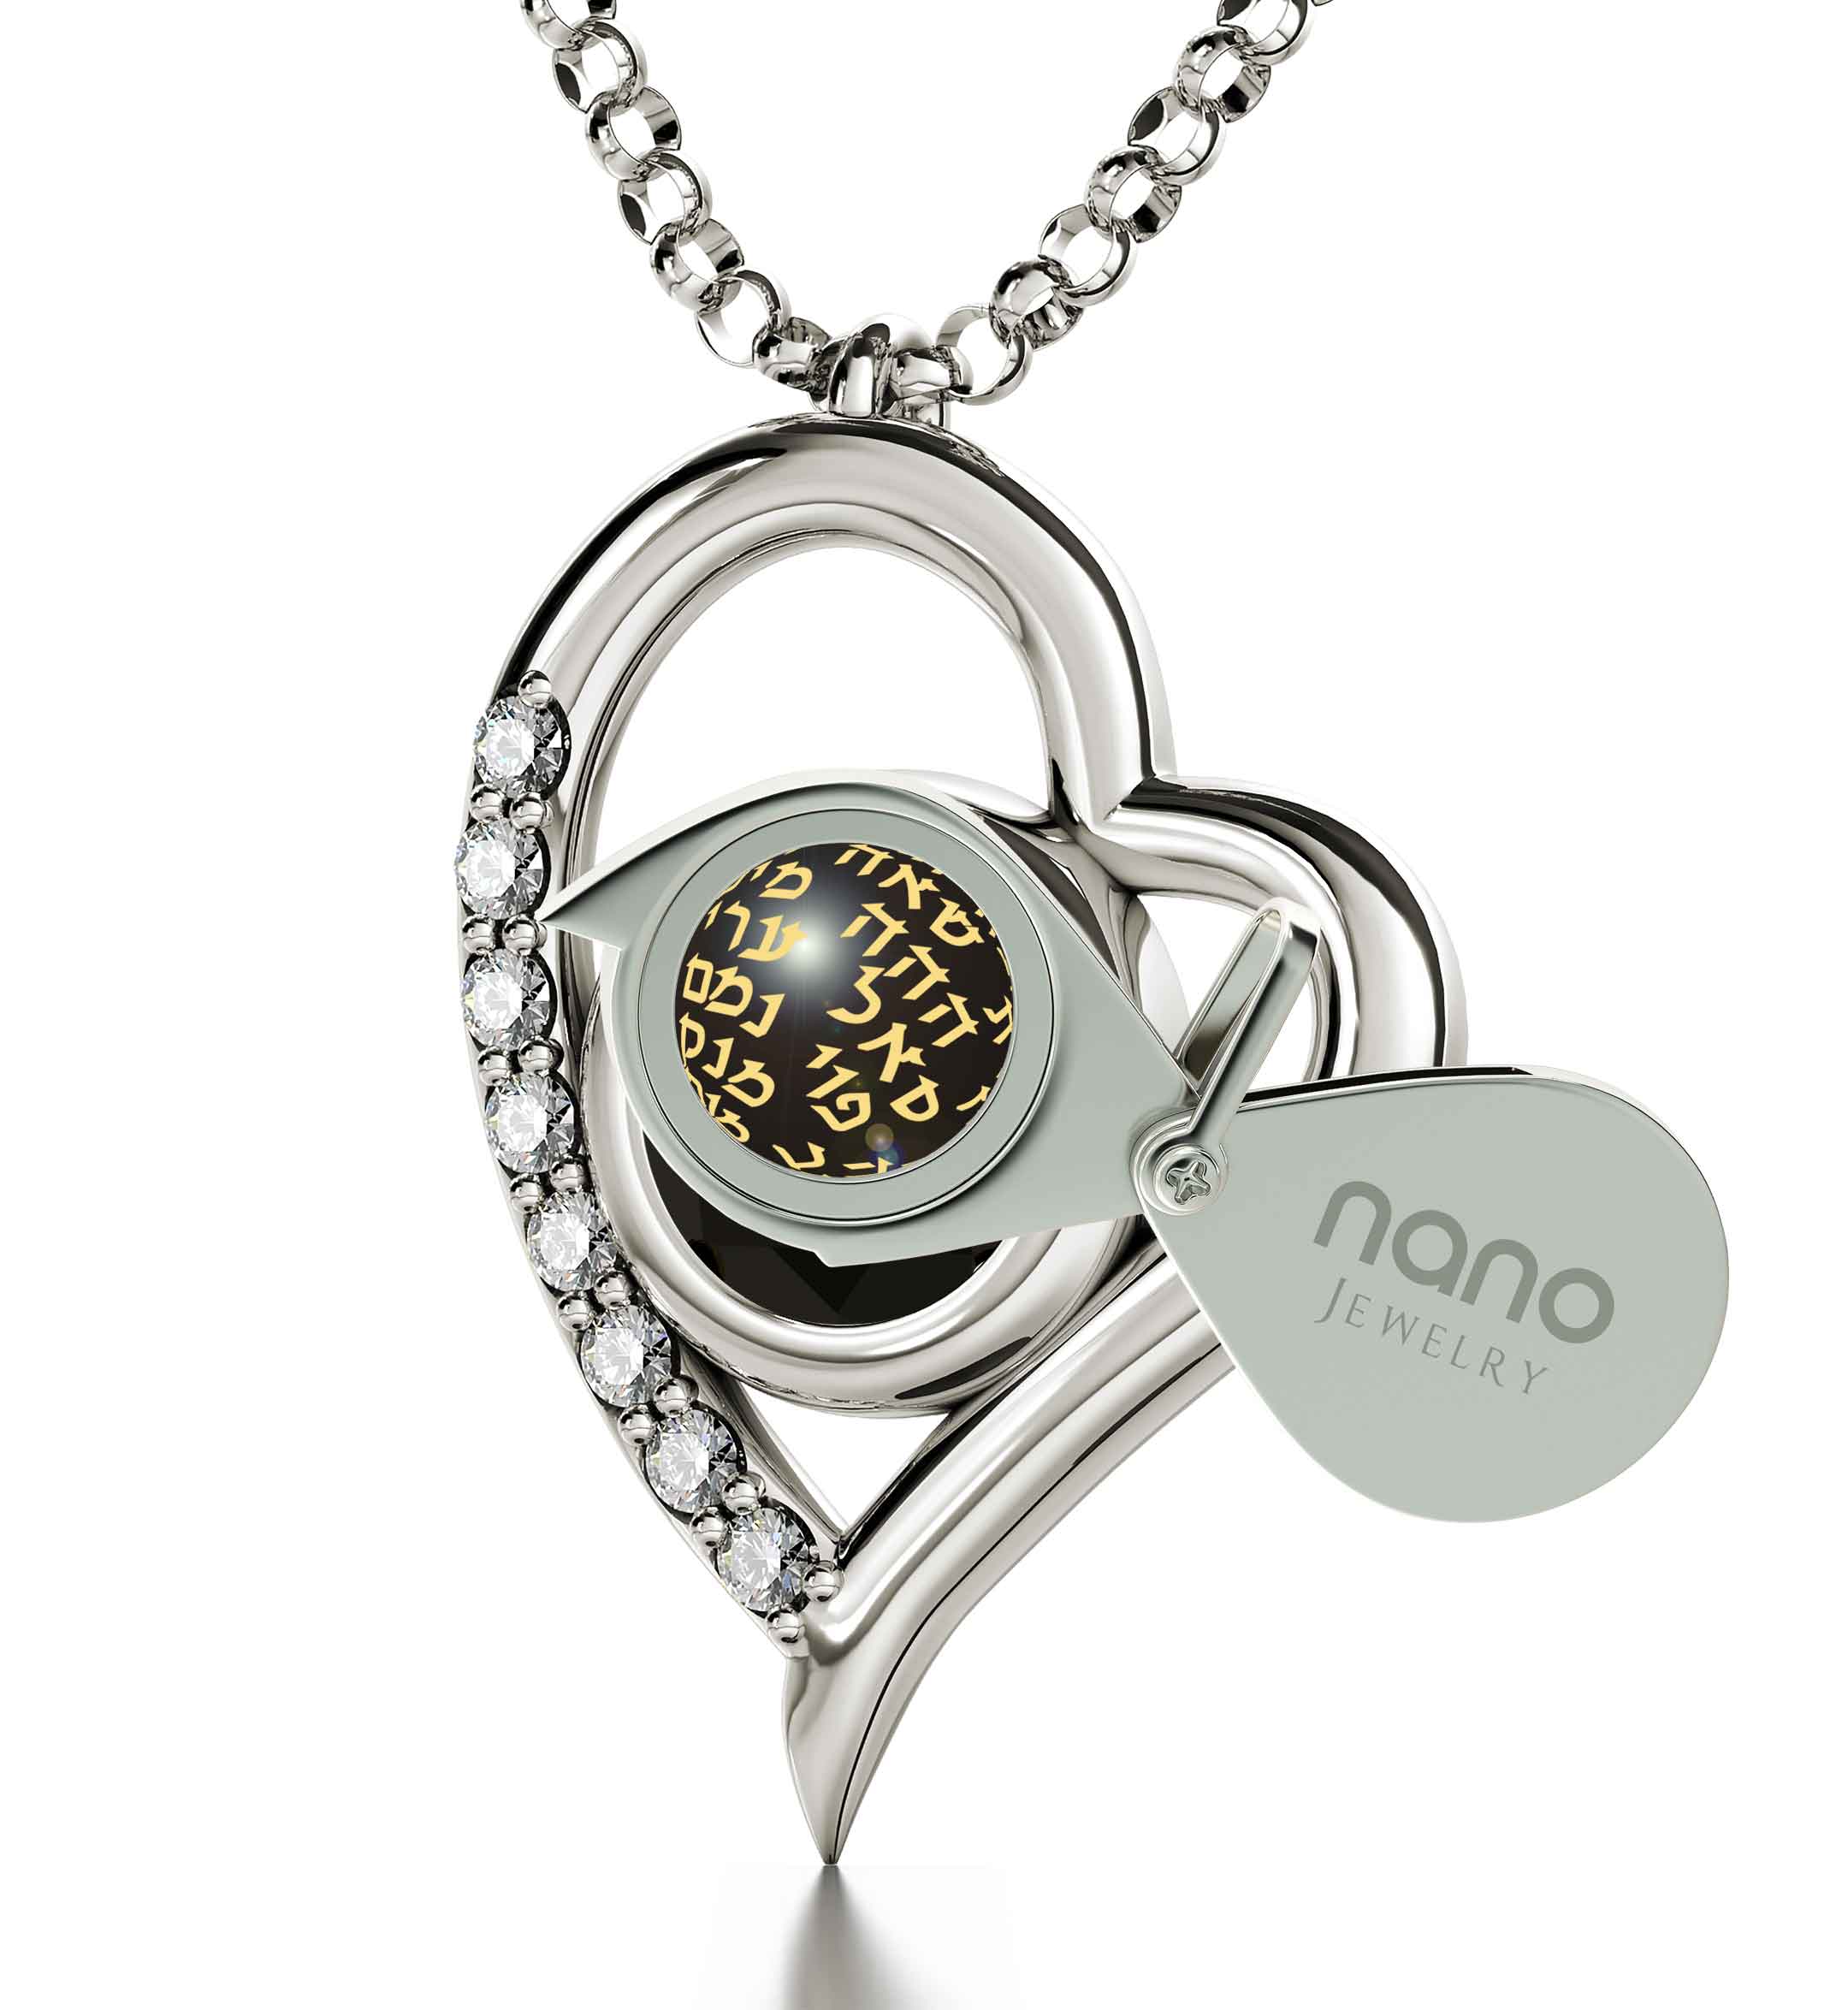 Close-up of a round-cut Swarovski crystal with golden text overlay containing various words, set in a 925 Sterling Silver Kabballah Necklace 72 Names Heart Pendant 24k Gold Inscribed frame.